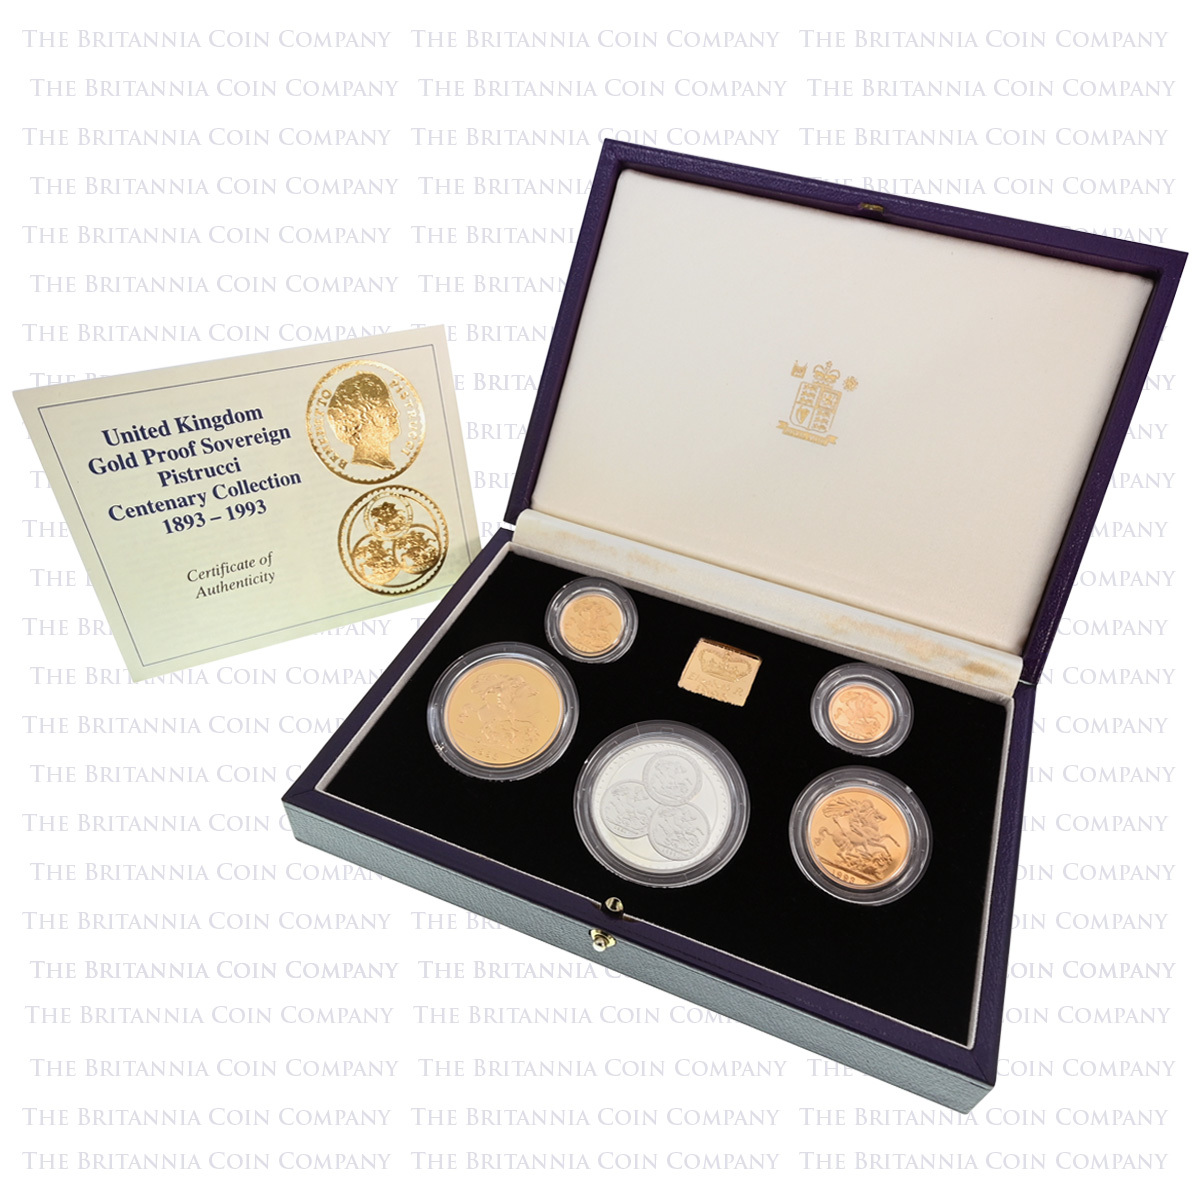 1993 Benedetto Pistrucci Centenary Collection Gold Proof Four Coin Sovereign Set Boxed